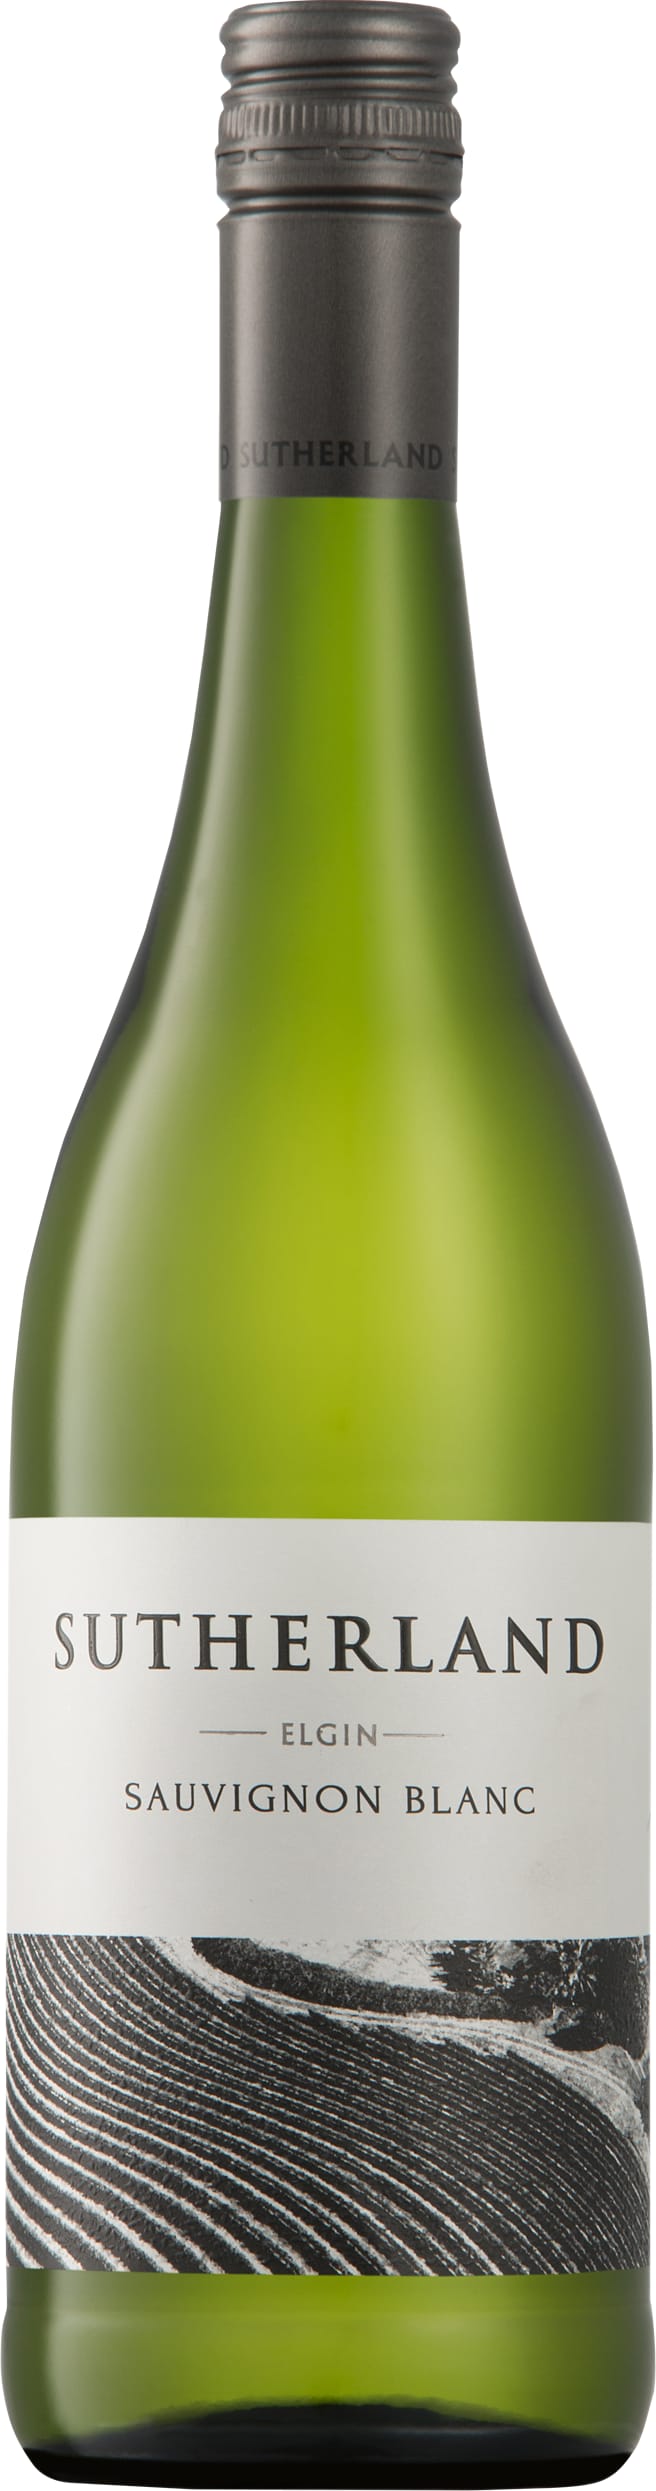 Thelema Mountain Vineyards Sutherland Sauvignon Blanc 2023 75cl - Buy Thelema Mountain Vineyards Wines from GREAT WINES DIRECT wine shop